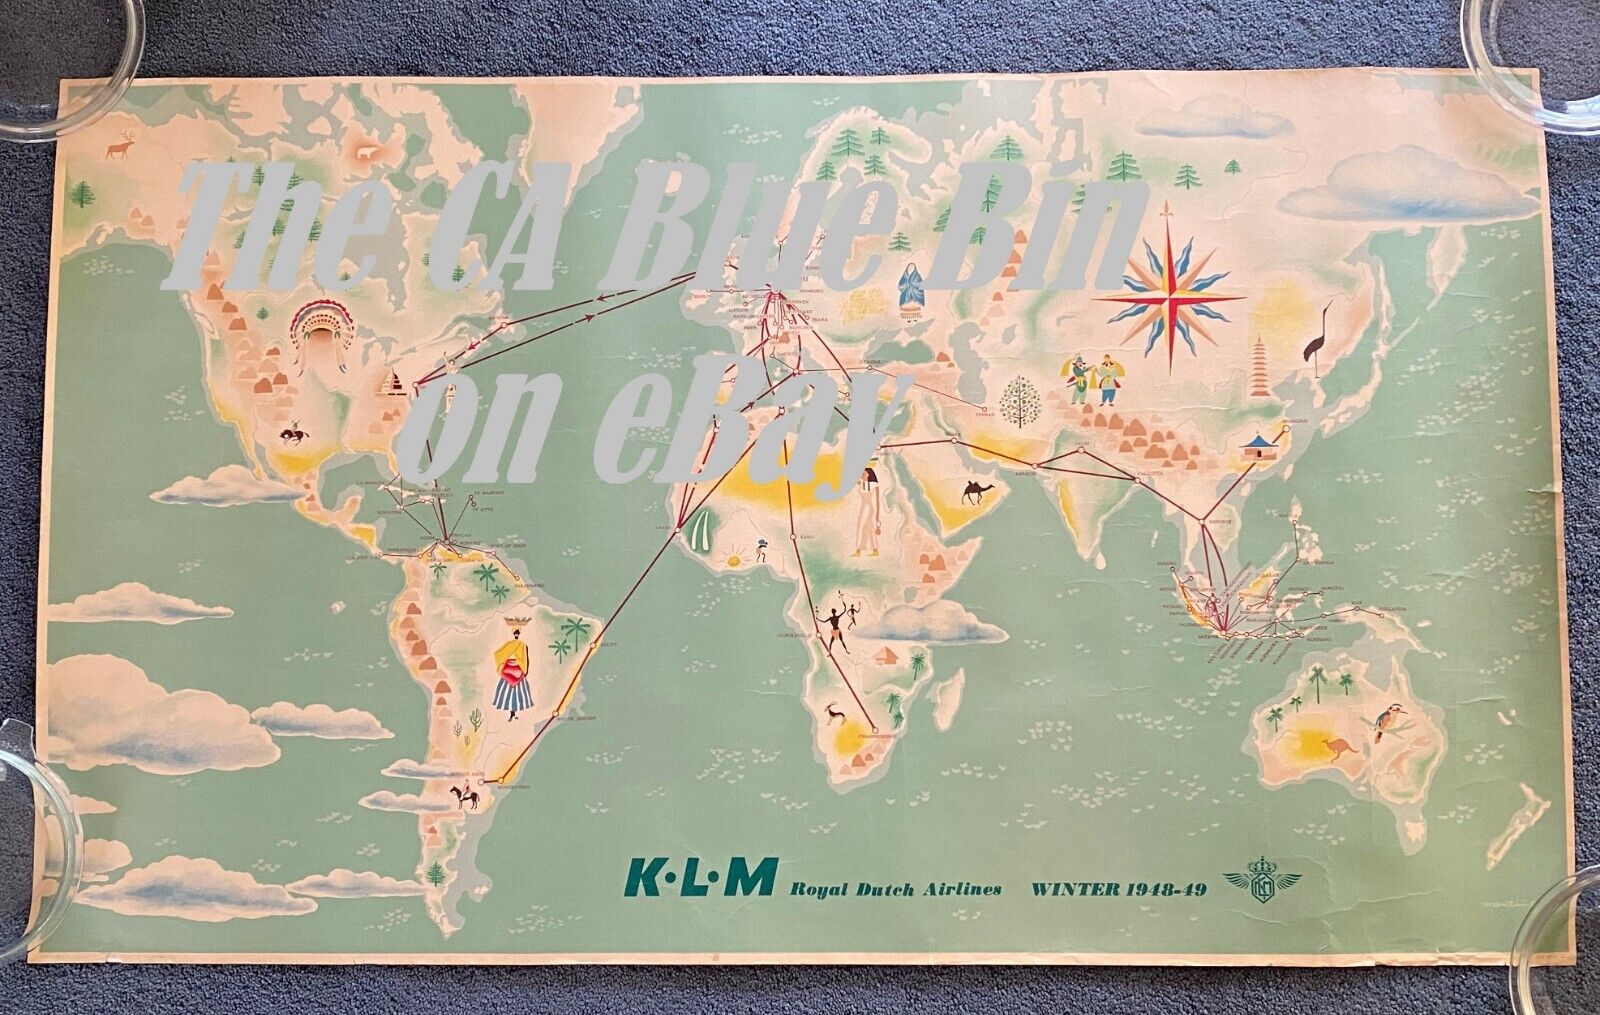 EXTREMELY RARE Winter 1948-49 KLM AIRLINES World Route Wall Map, Vintage Travel